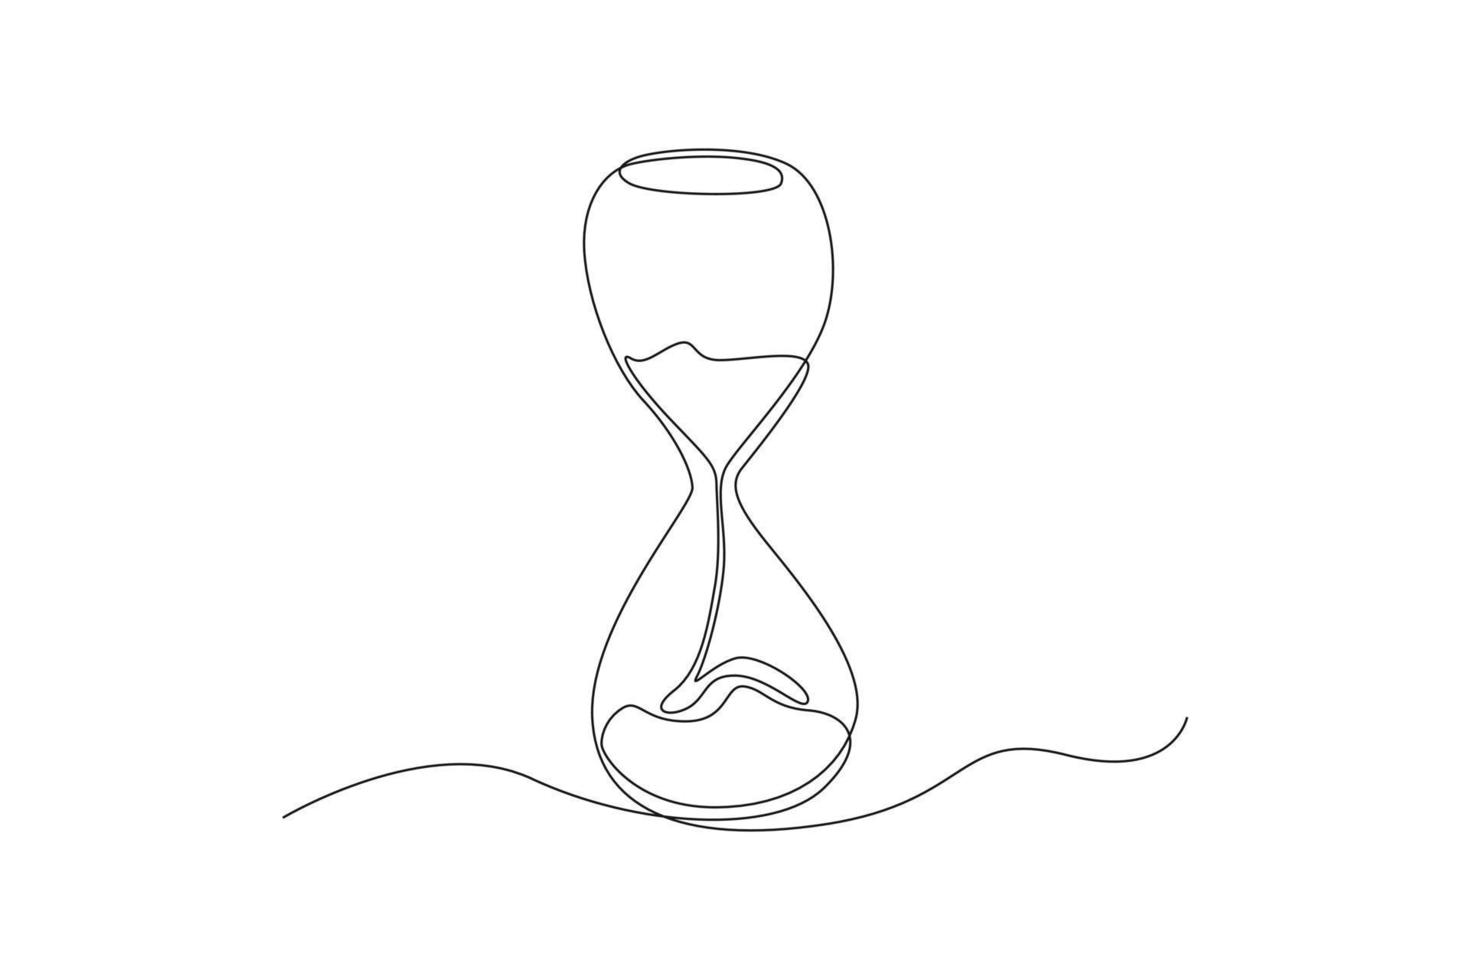 Continuous one line drawing hourglass. Timer concept. Single line draw design vector graphic illustration.